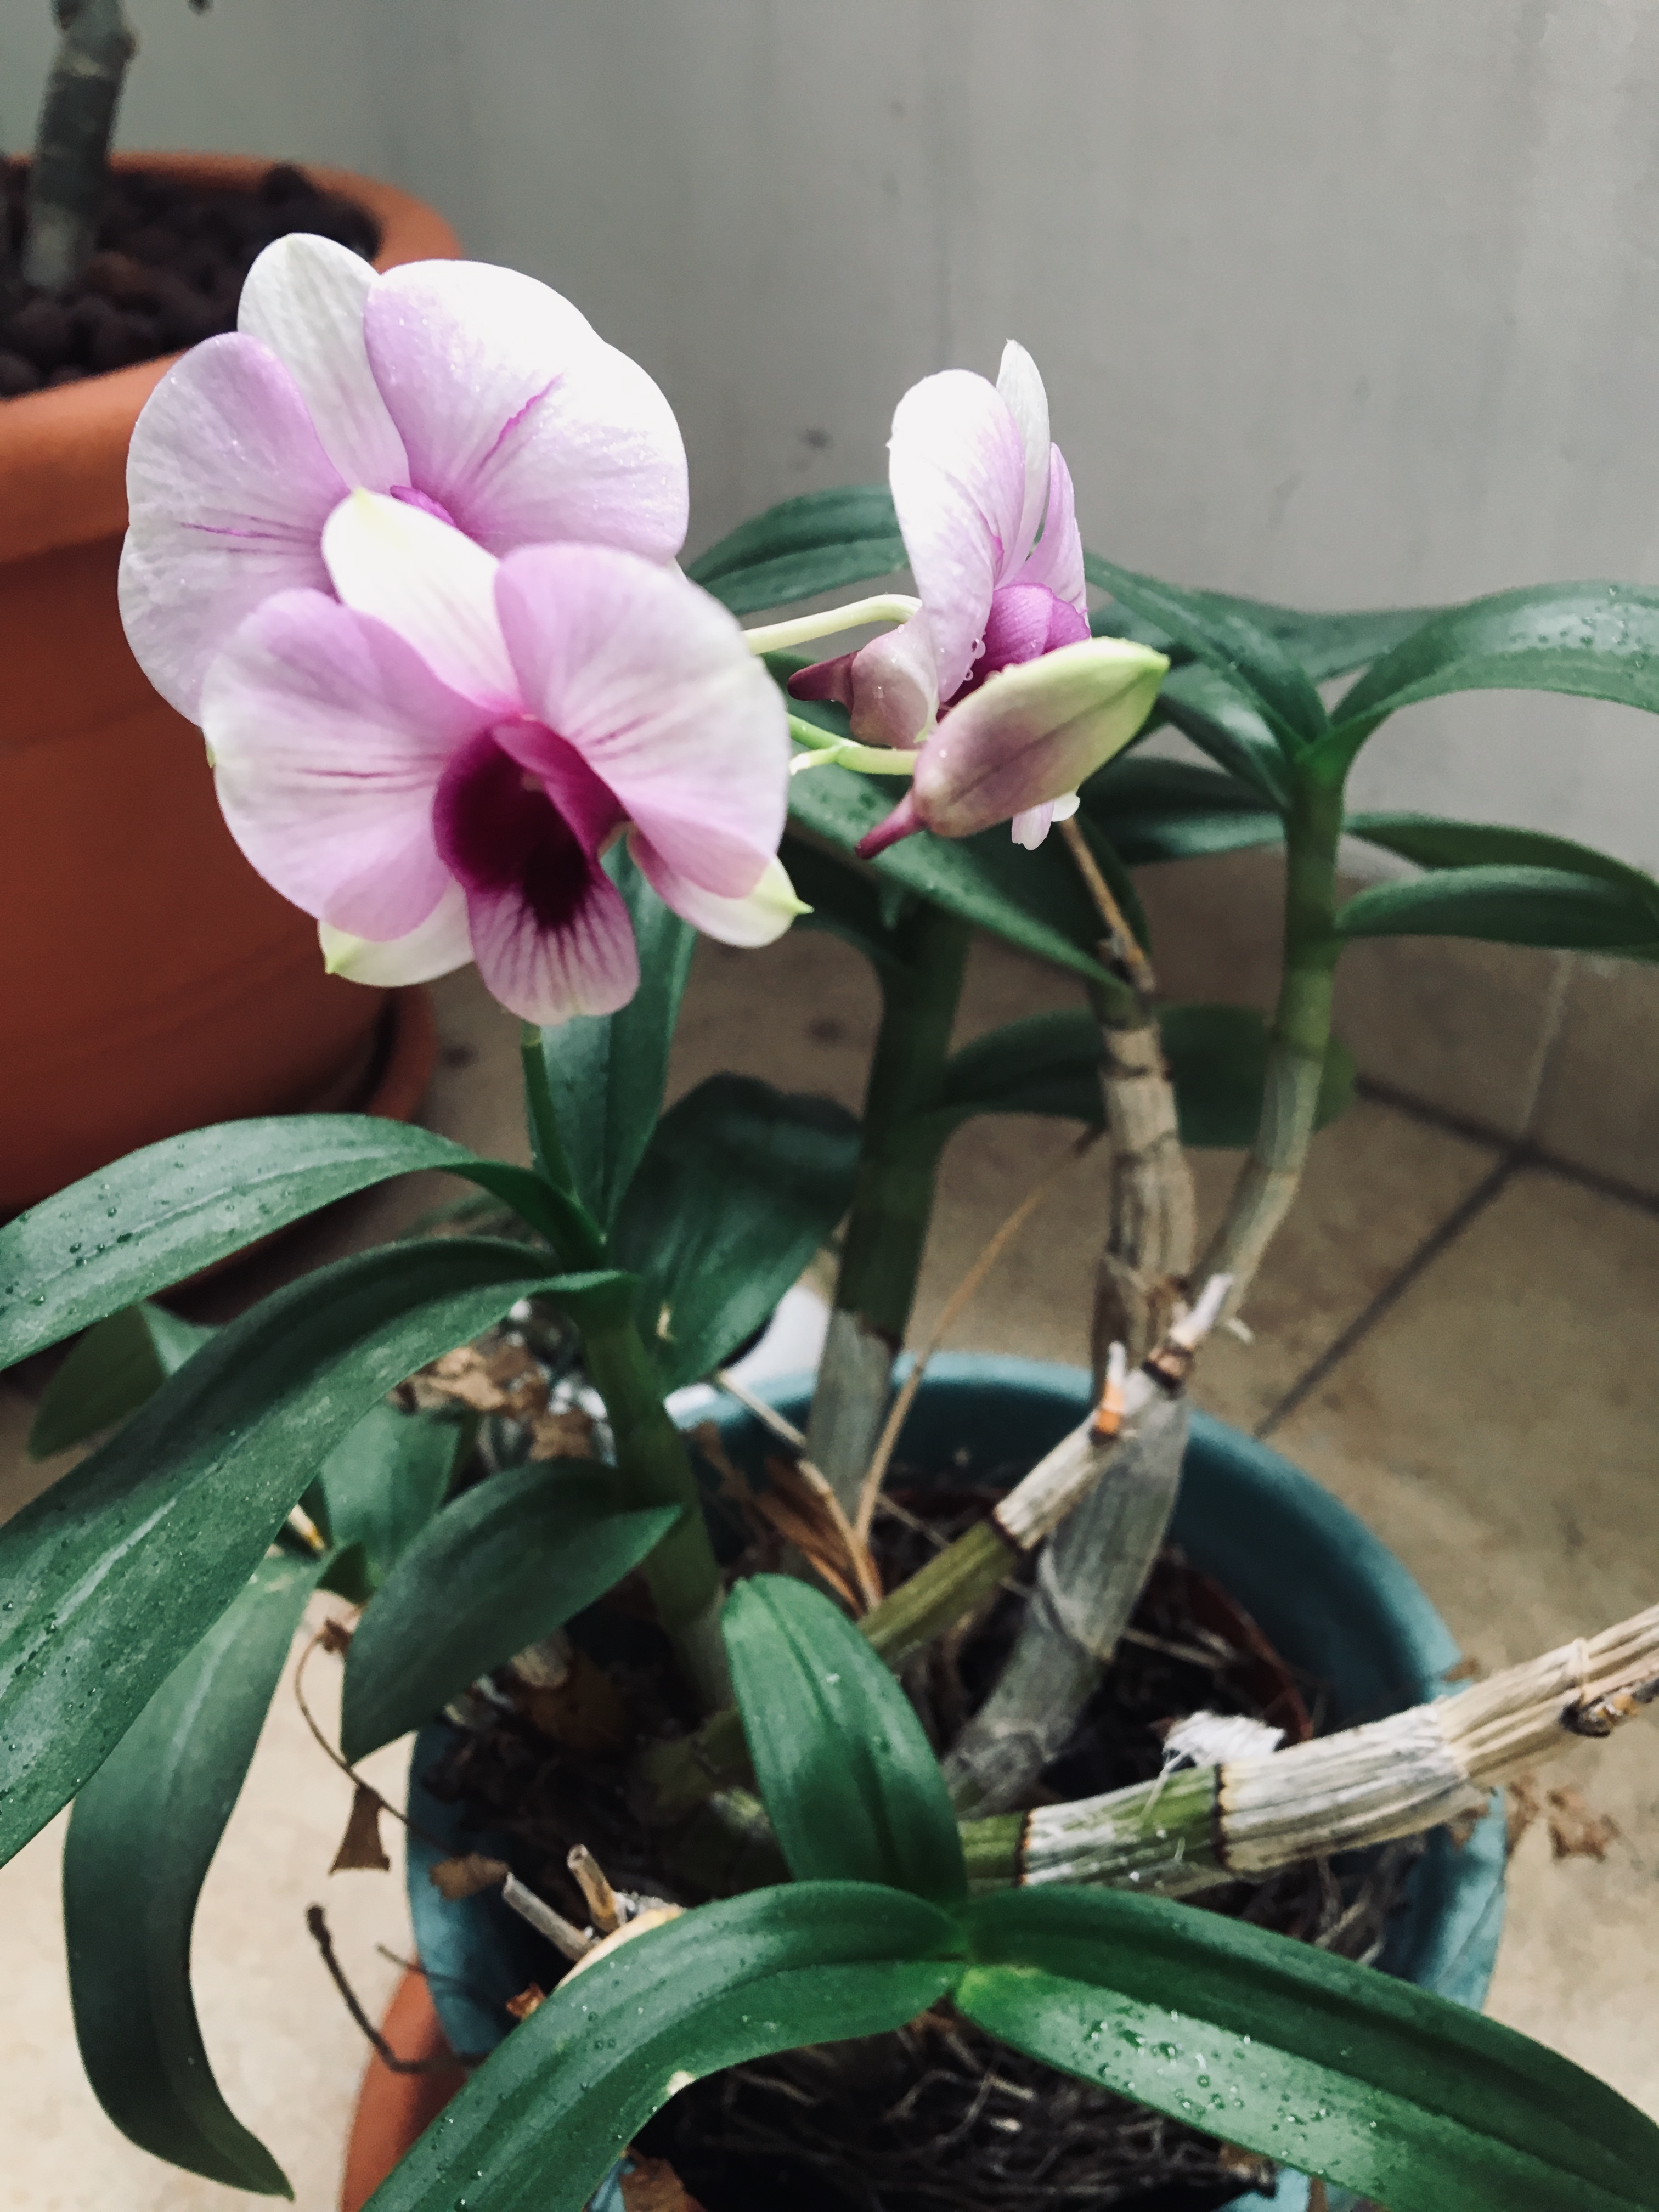 It took me 2 years to see the beautiful orchid flower blooming